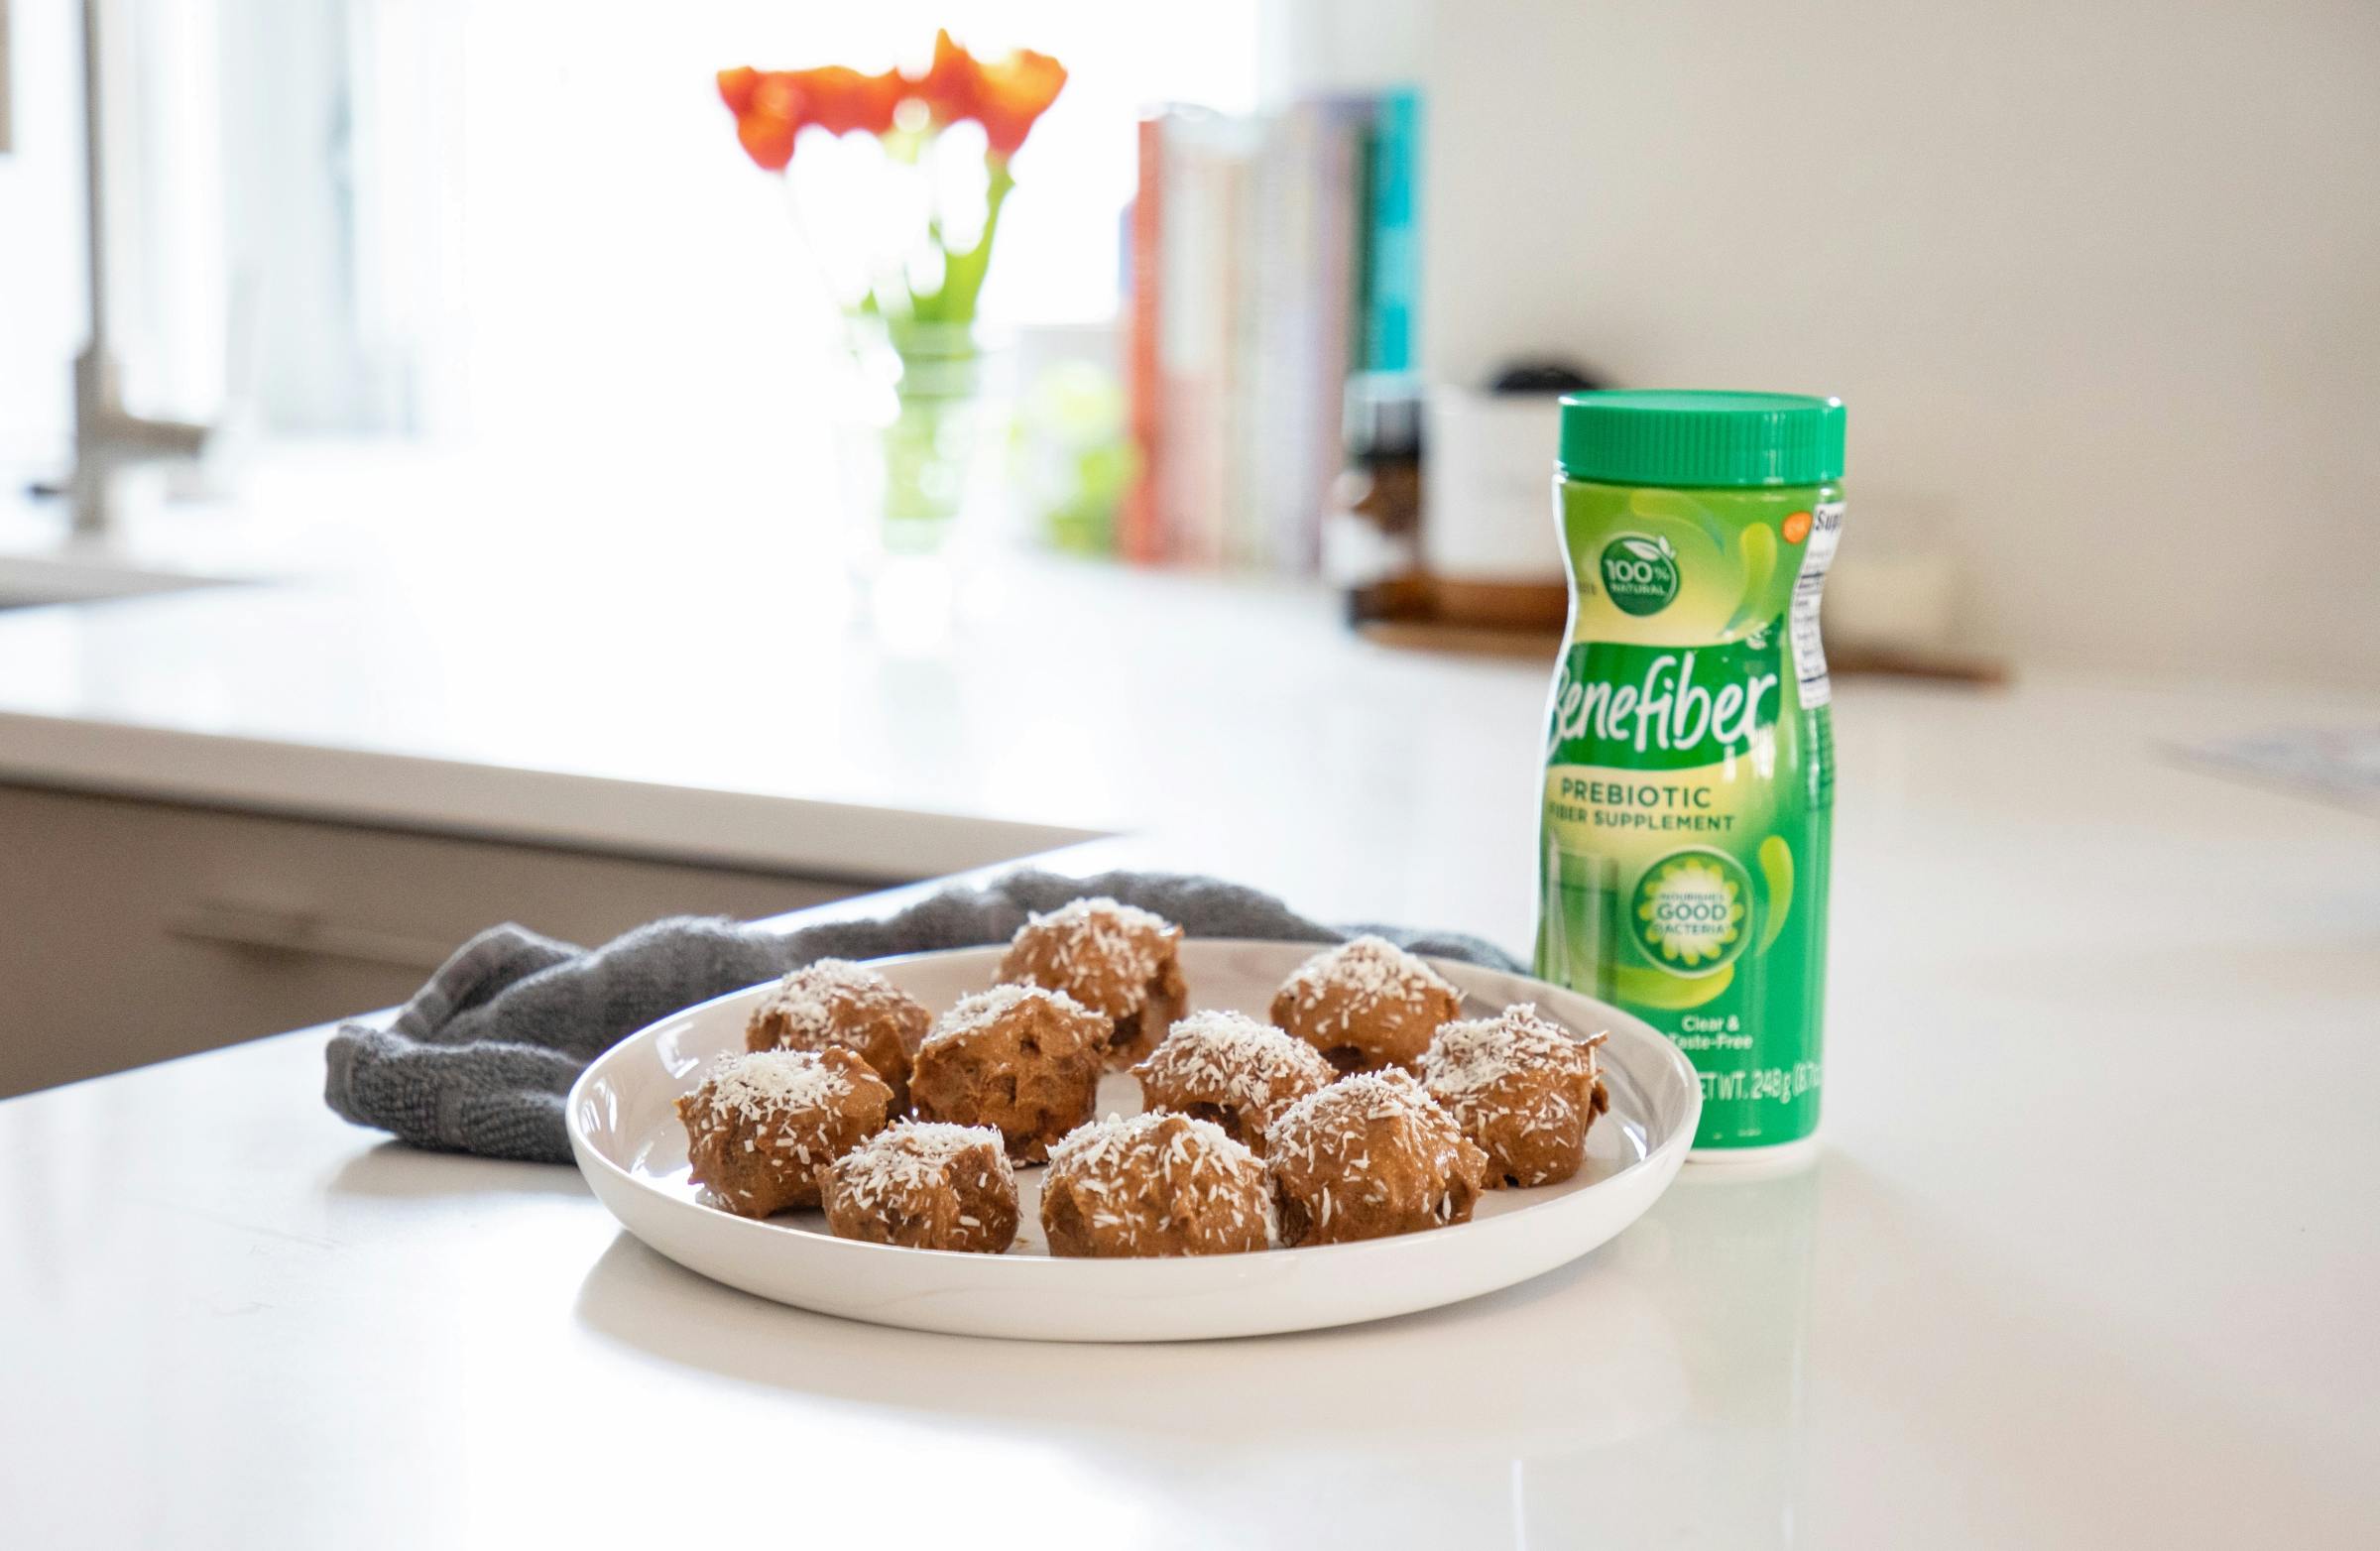 Try these tasty Energy Boosting Almond Butter Chocolate Balls Made with Benefiber!